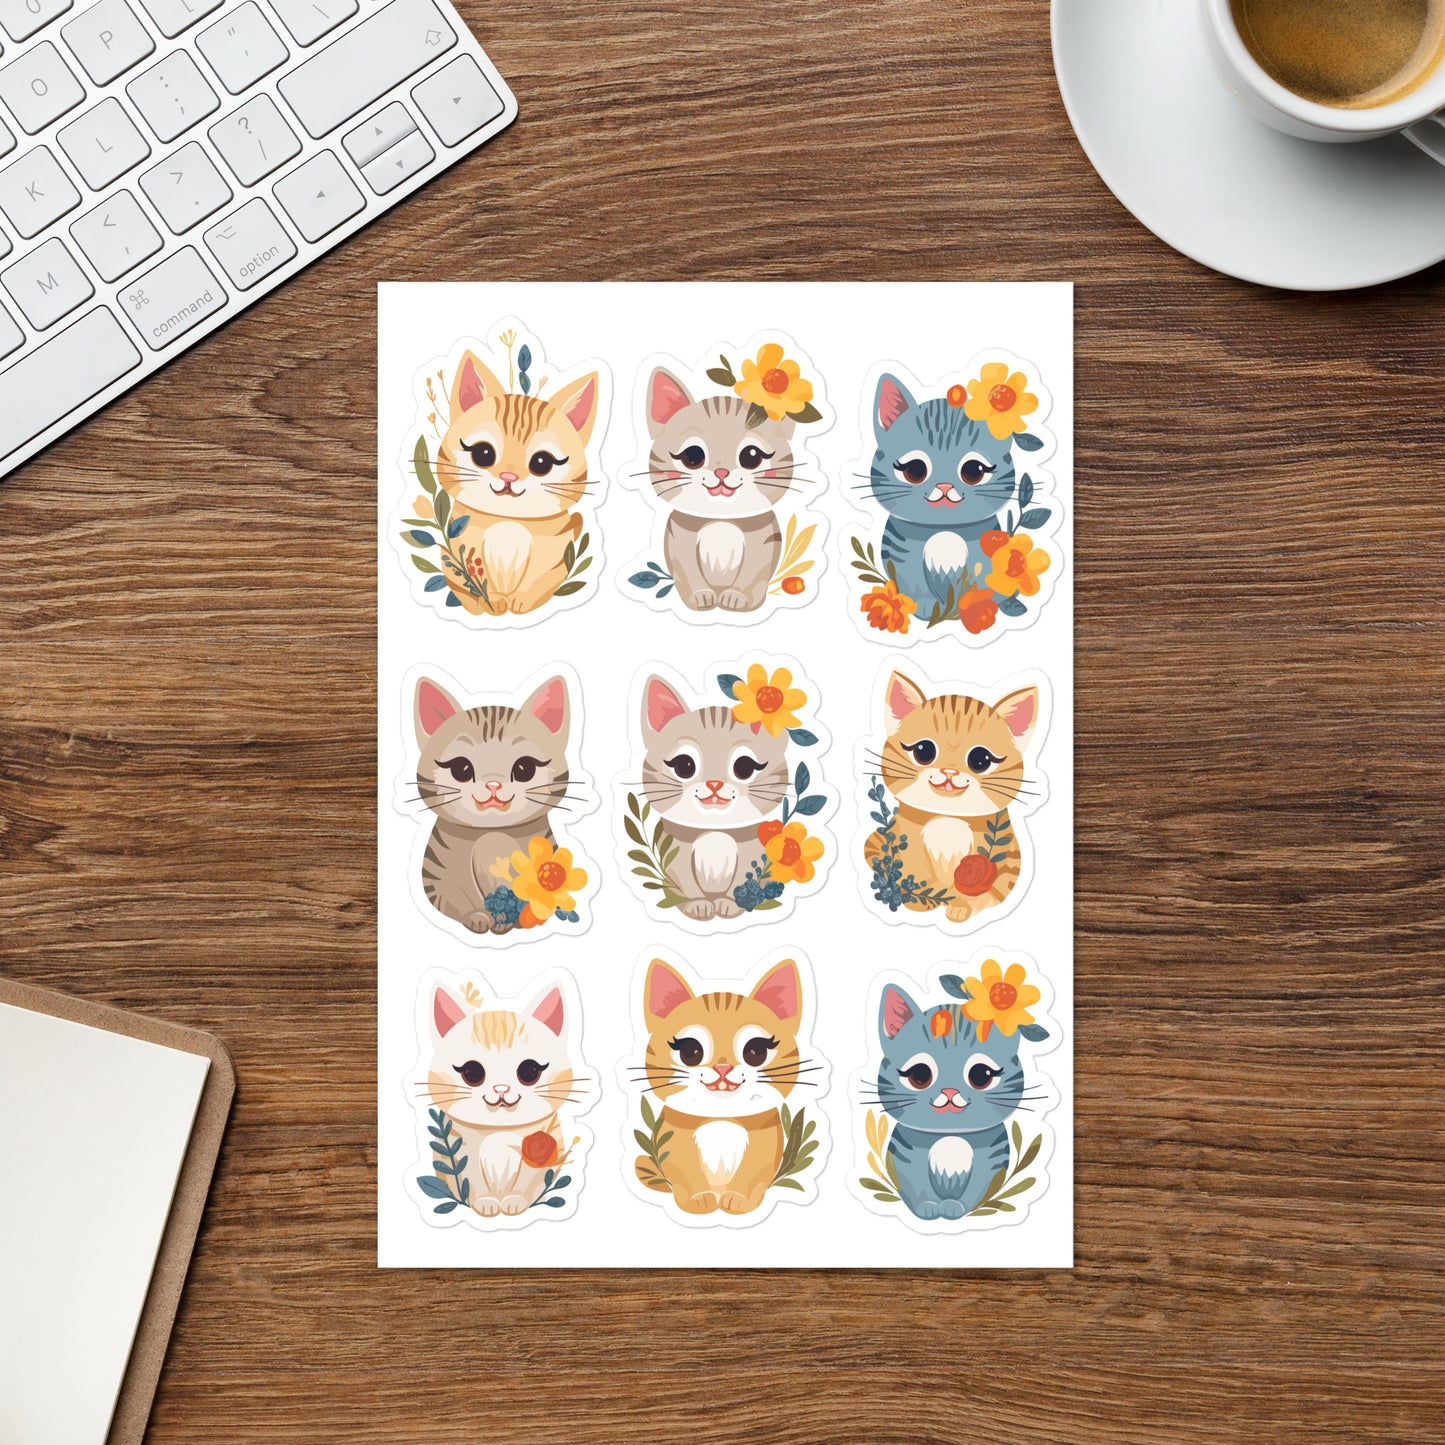 Cats with Flowers Sticker Sheets Set,  Kittens Aesthetic Cute Wall Decal Pack Car Decor Vinyl Water Proof Die Cut Glossy